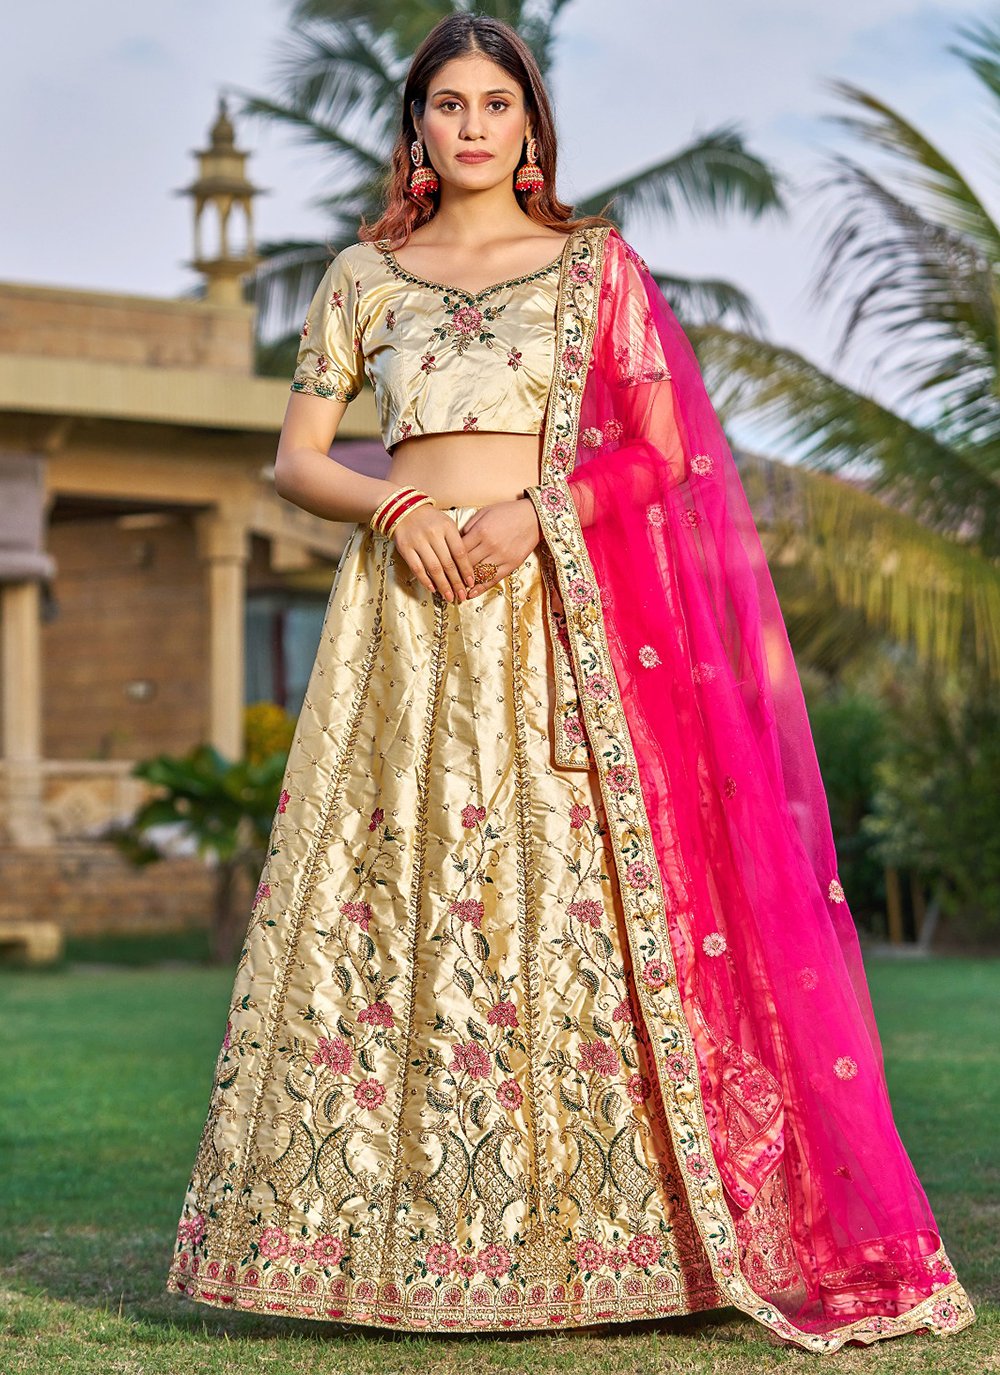 Girls Satin-Net-Brocade Radha Lehenga Fancy Dress in Golden & Red Color  Combination at Rs 1299 in Greater Noida